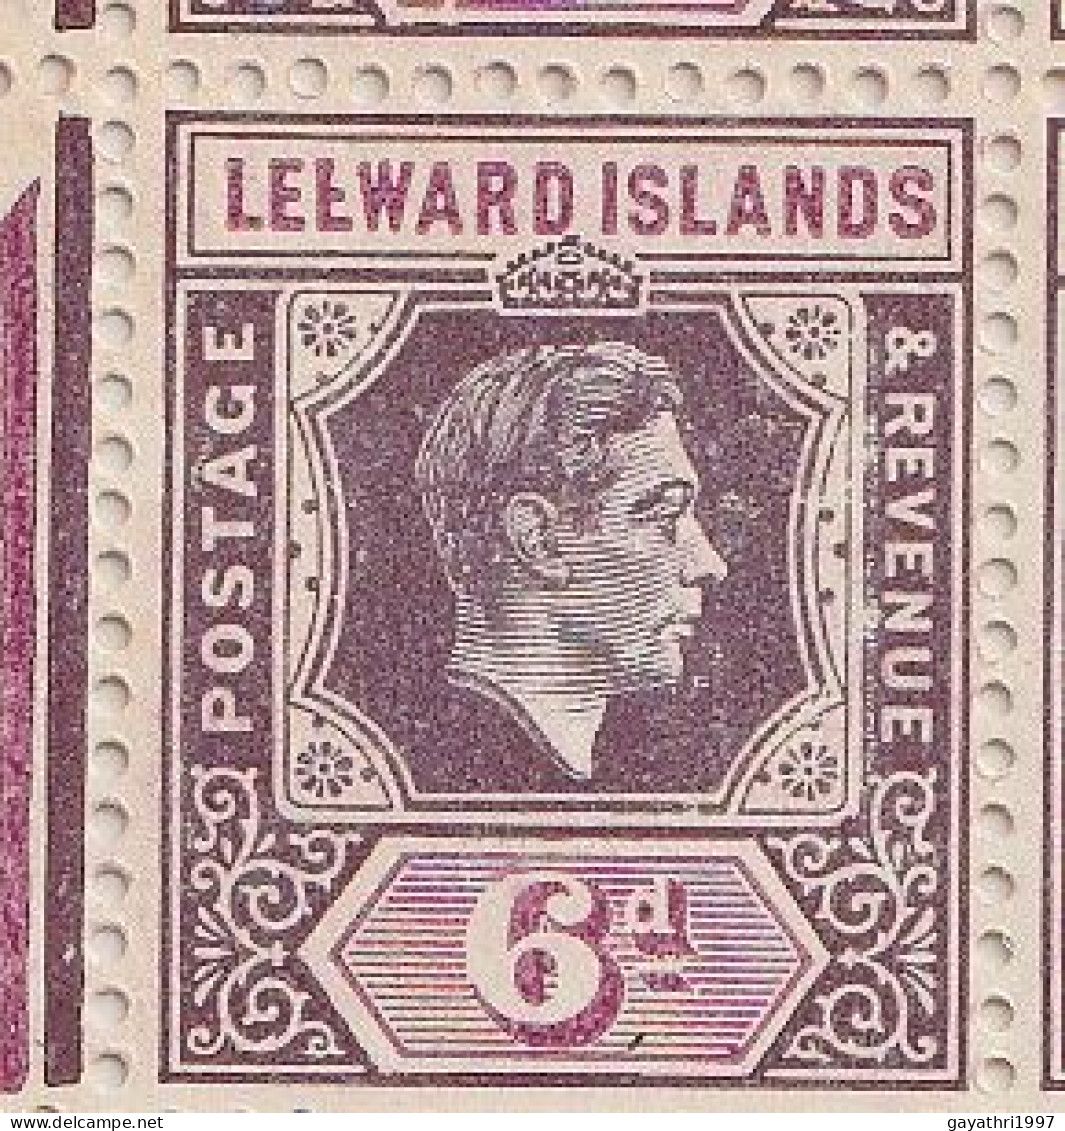 Leeward Island 1942 SG 109 Block Of 15 Stamps With Errors And Variety's, E Broken Left Row 4th Stamp (SG109 Ab)and(sh16) - Errors, Freaks & Oddities (EFOs